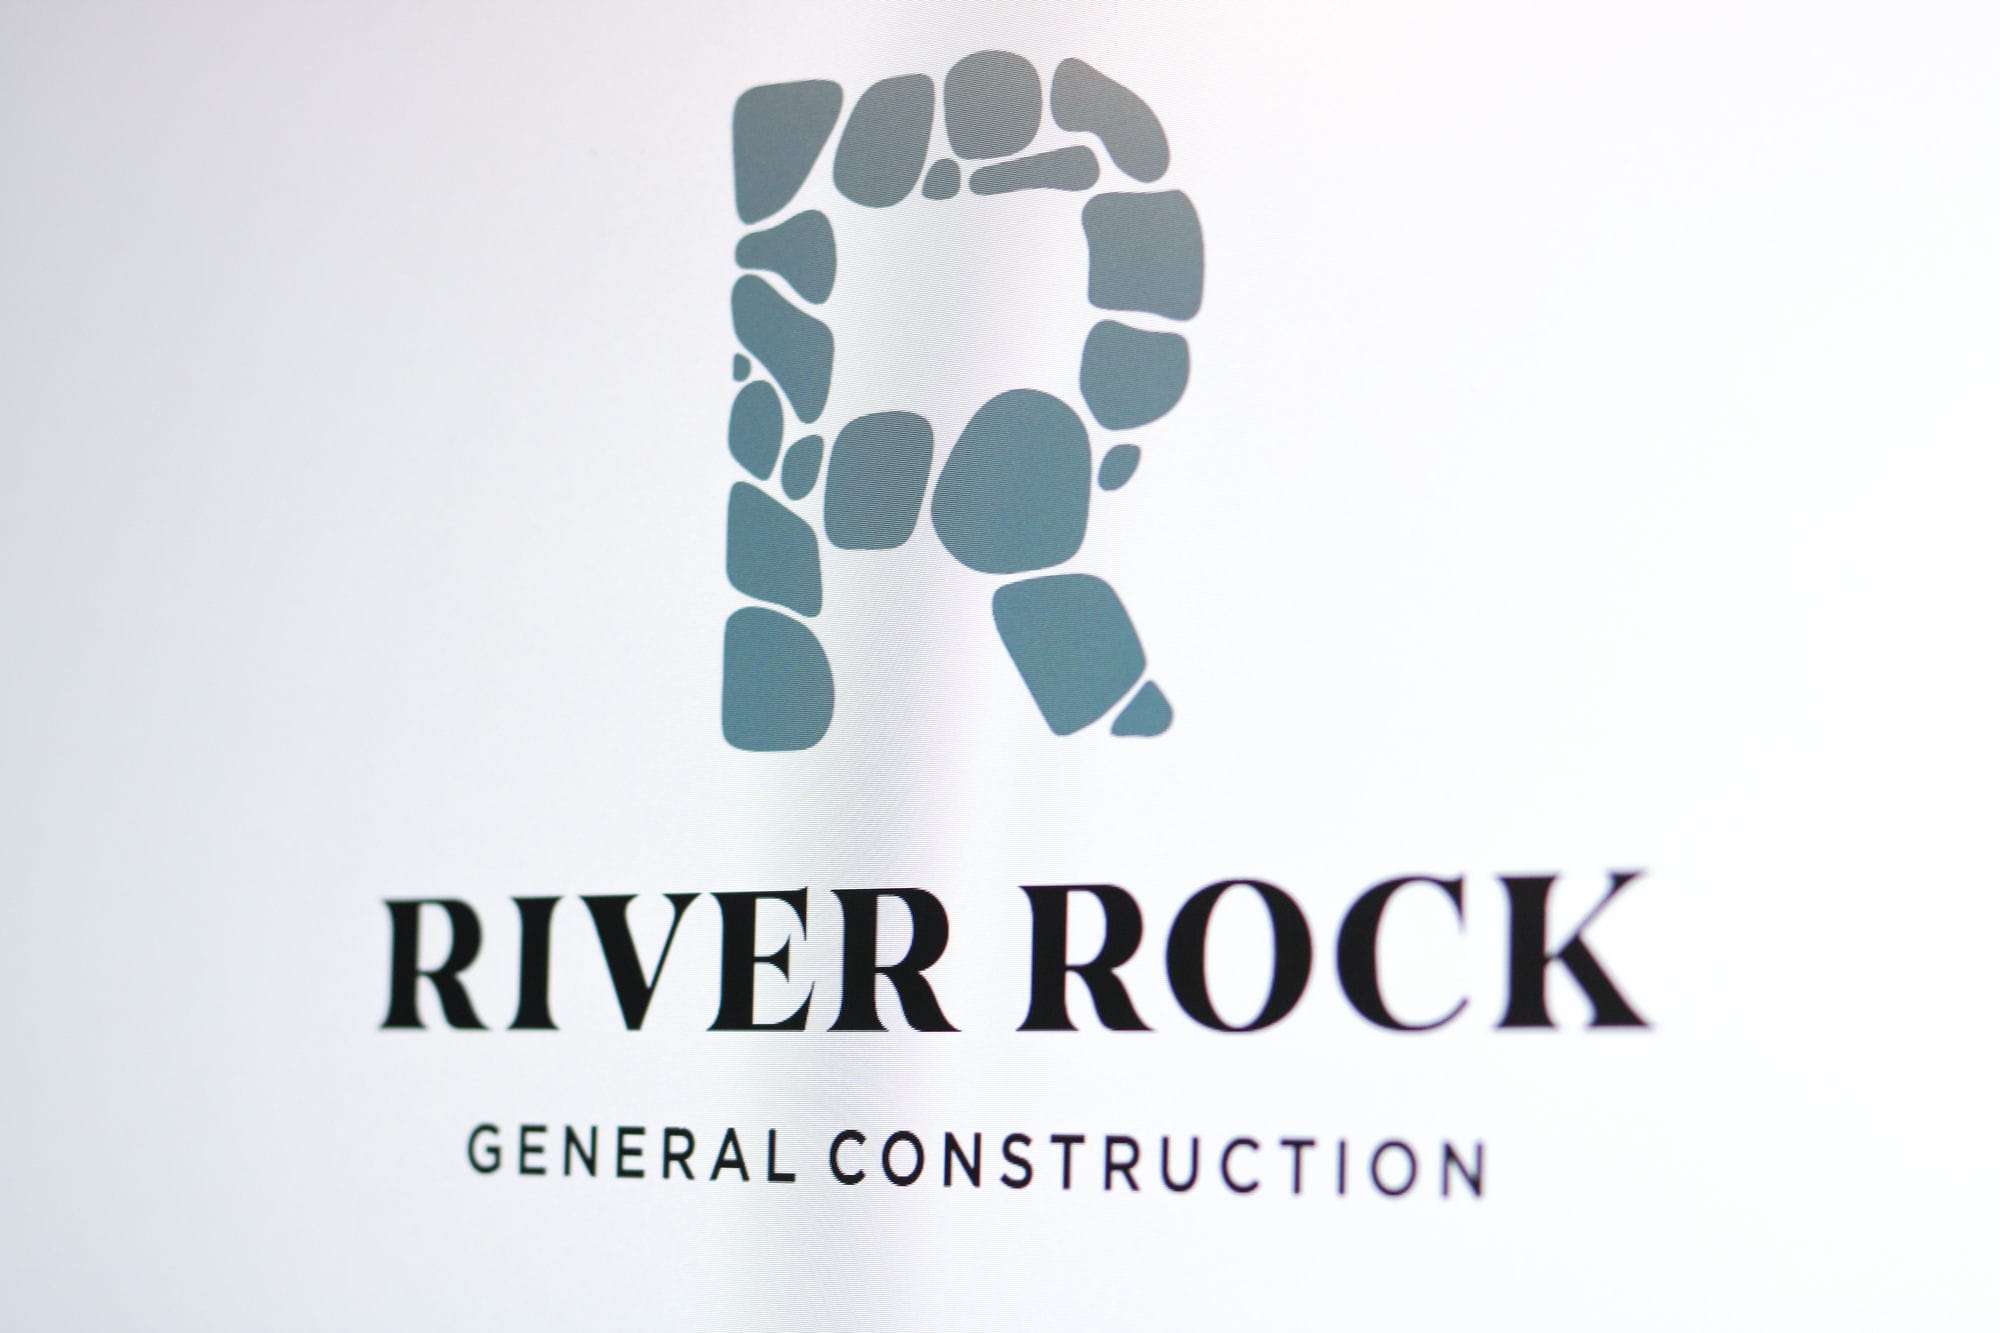 Logo created by Graticle Design for River Rock General Construction, featuring a stylized 'R' composed of river stones.